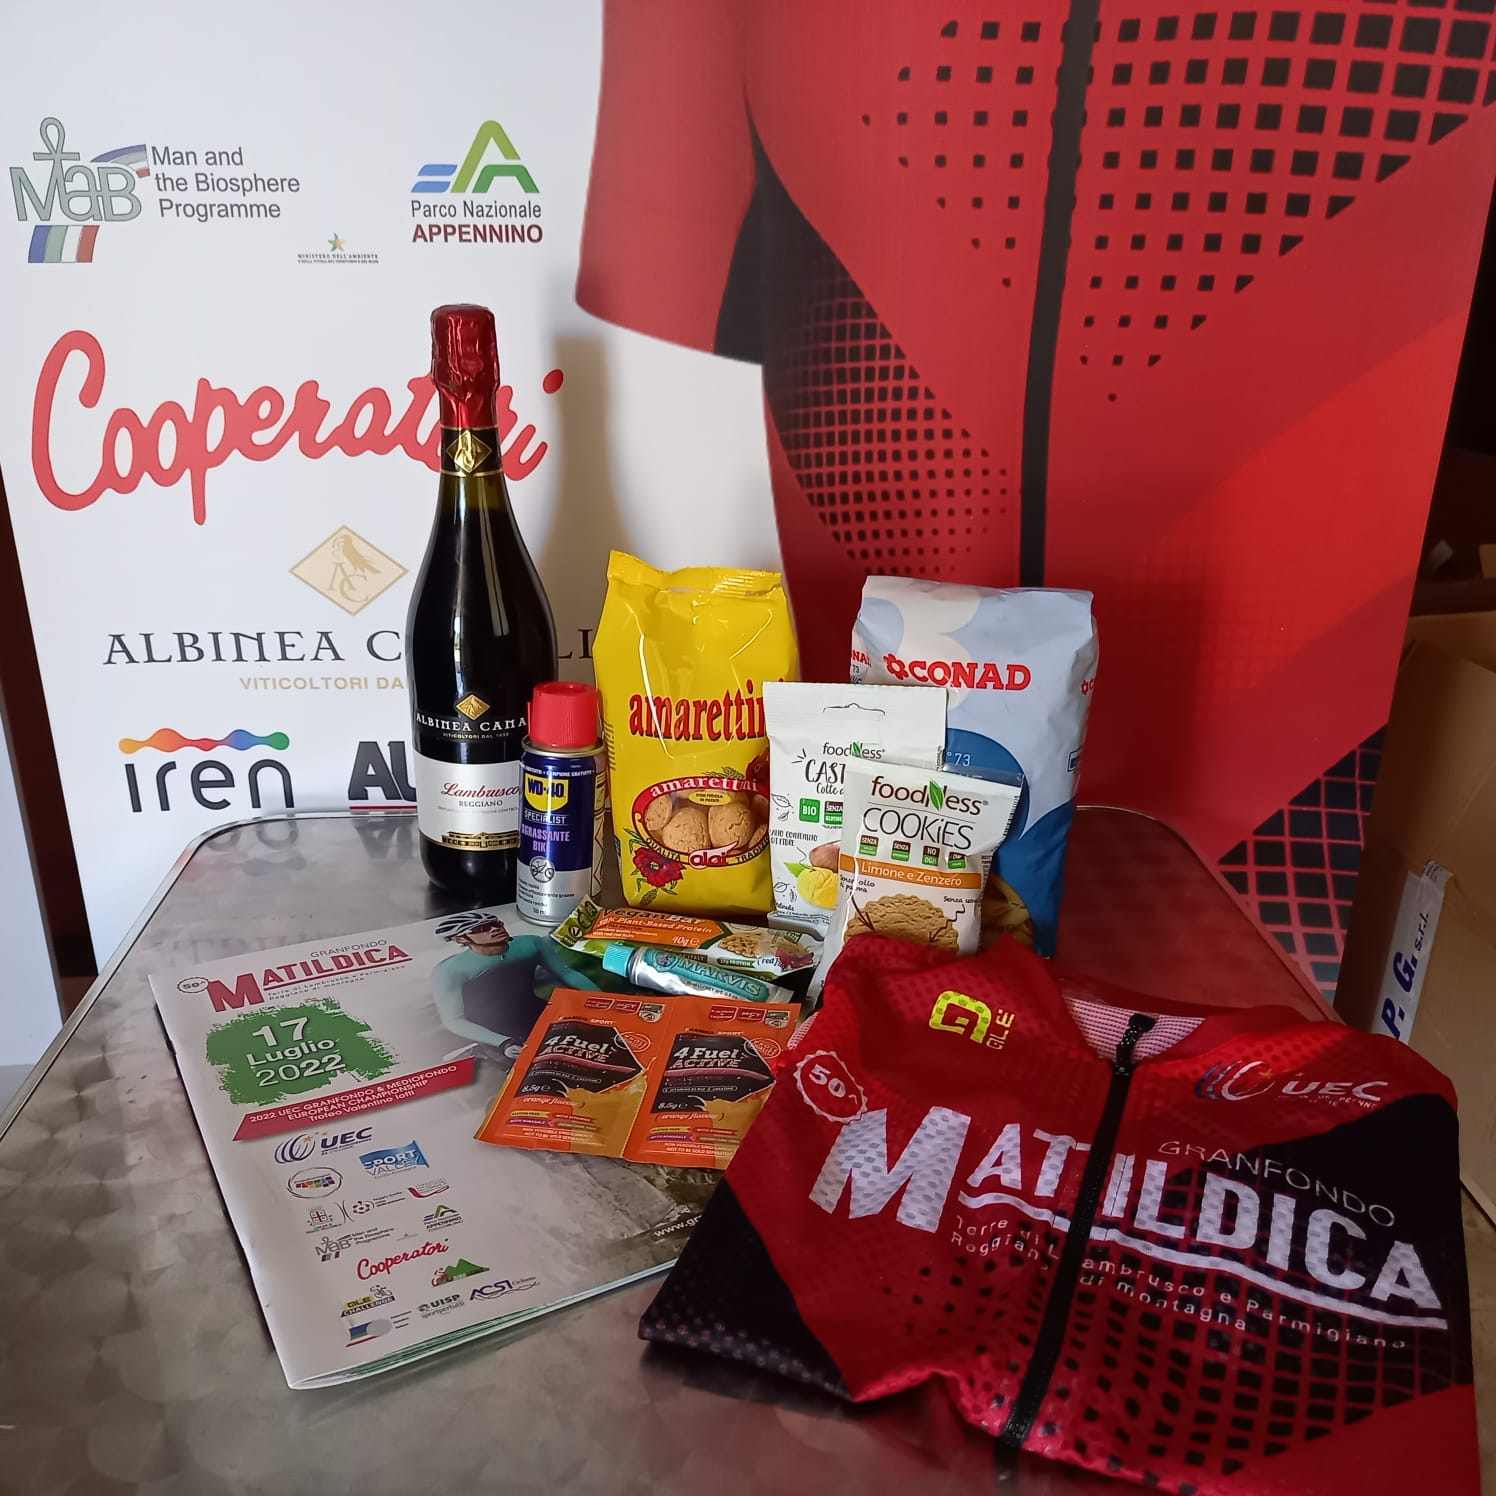 Here is the race package of the fifth Granfondo Matildica